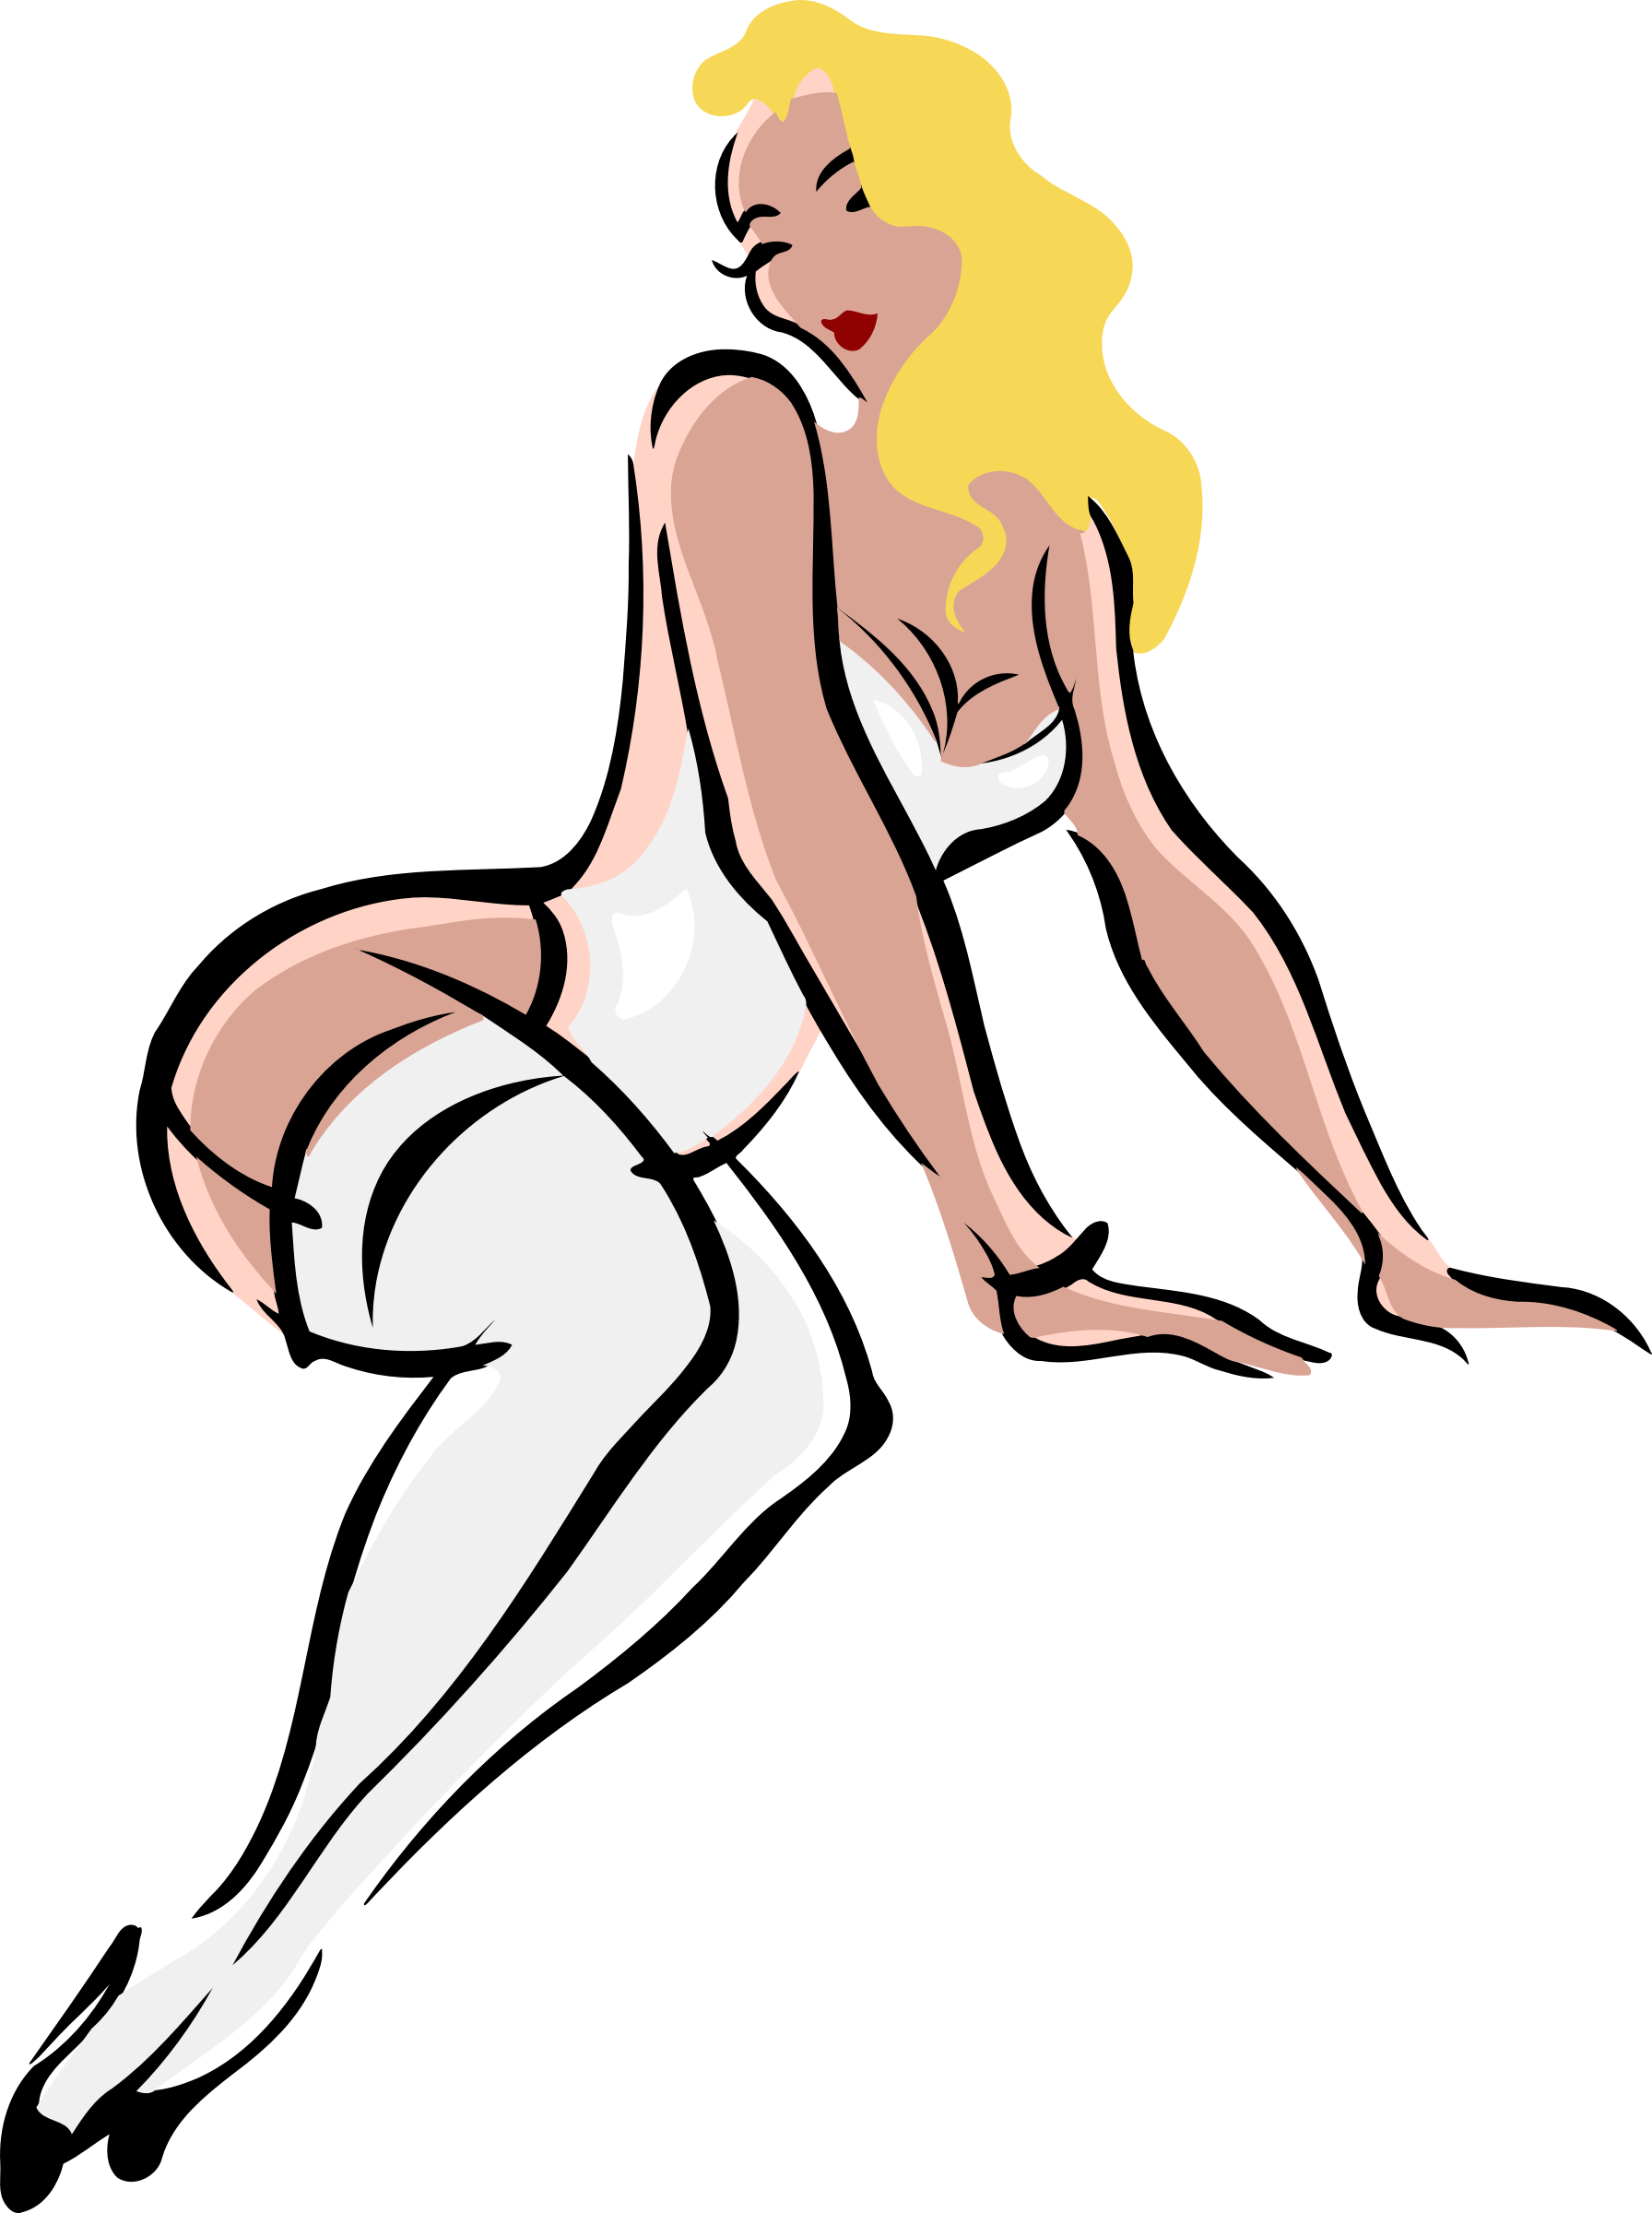 Light Skin, Blonde Hair, White Clothes - Clipart Of A Sexy Girl (1792x2400)